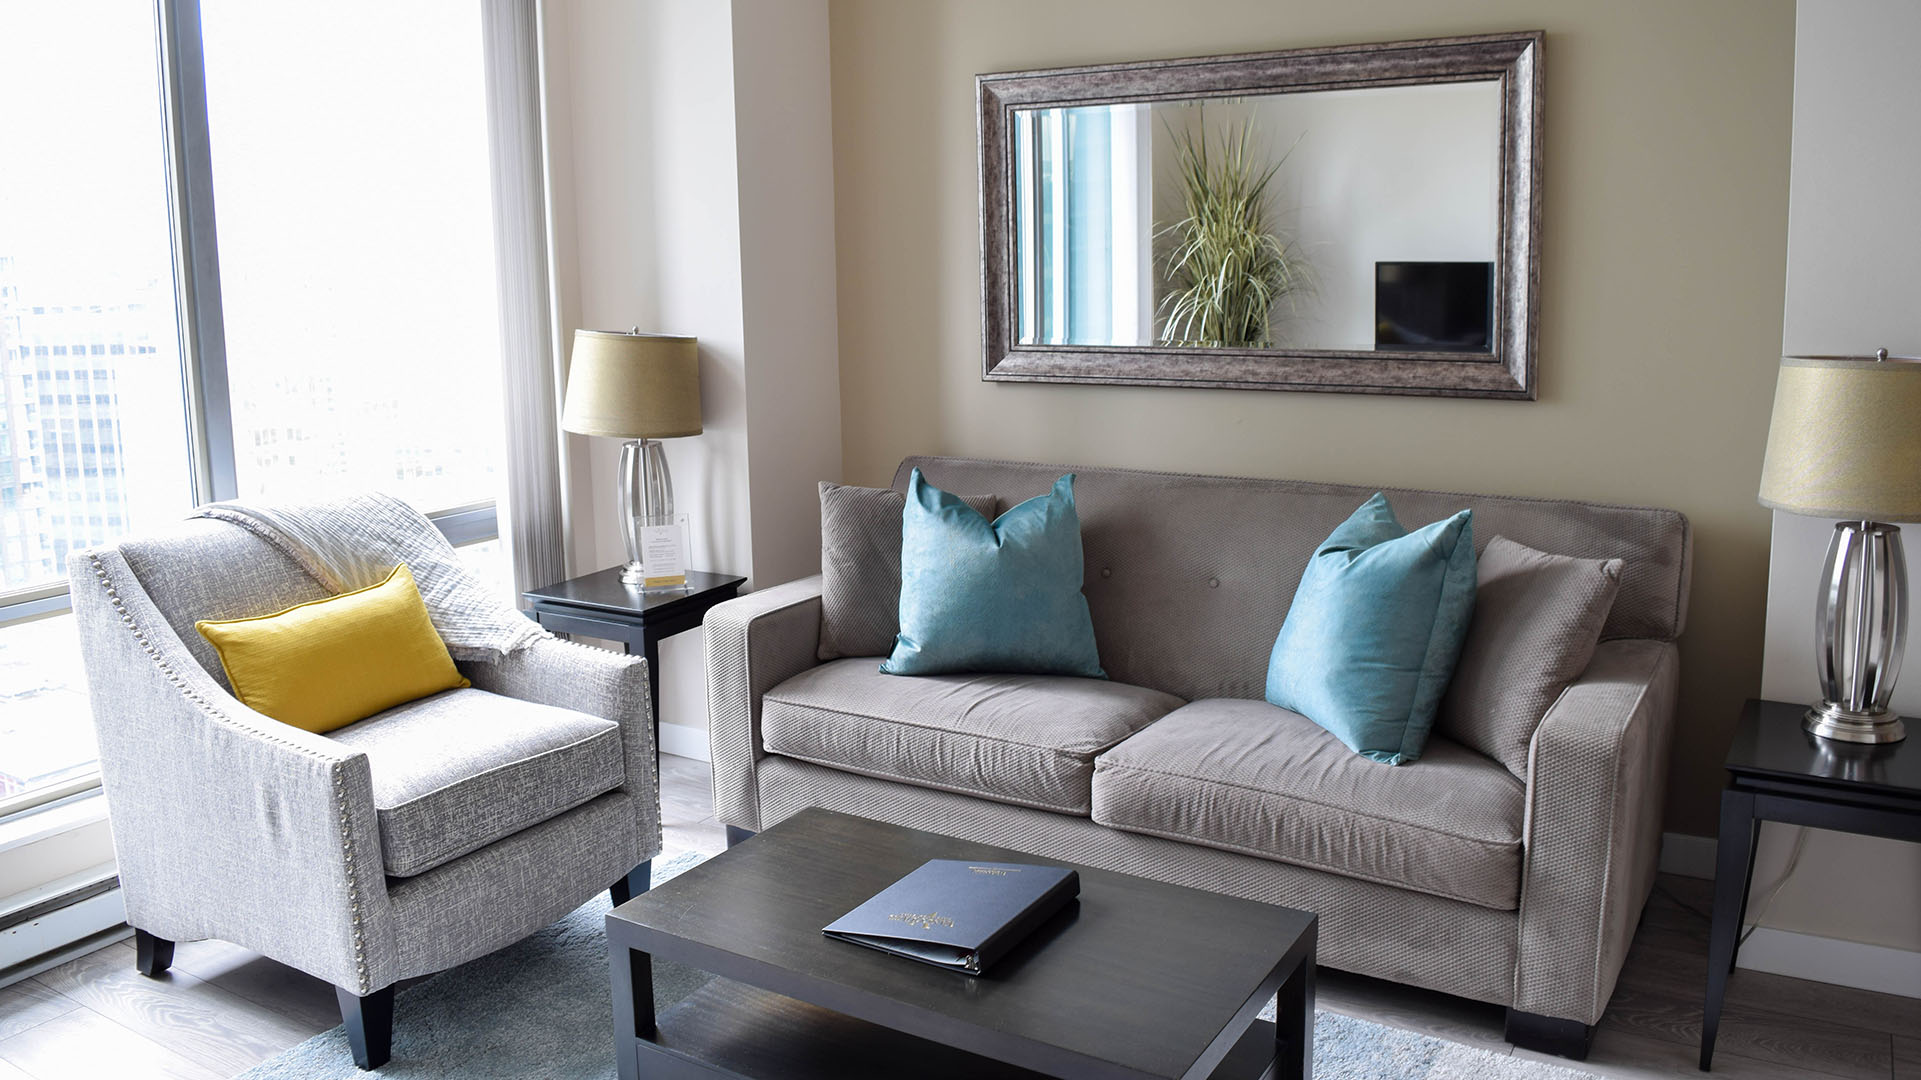 Grey sofa, light grey chair, and a wall mirror in the living room of apartment 1903-1200 West Georgia, at the Residences on Georgia.